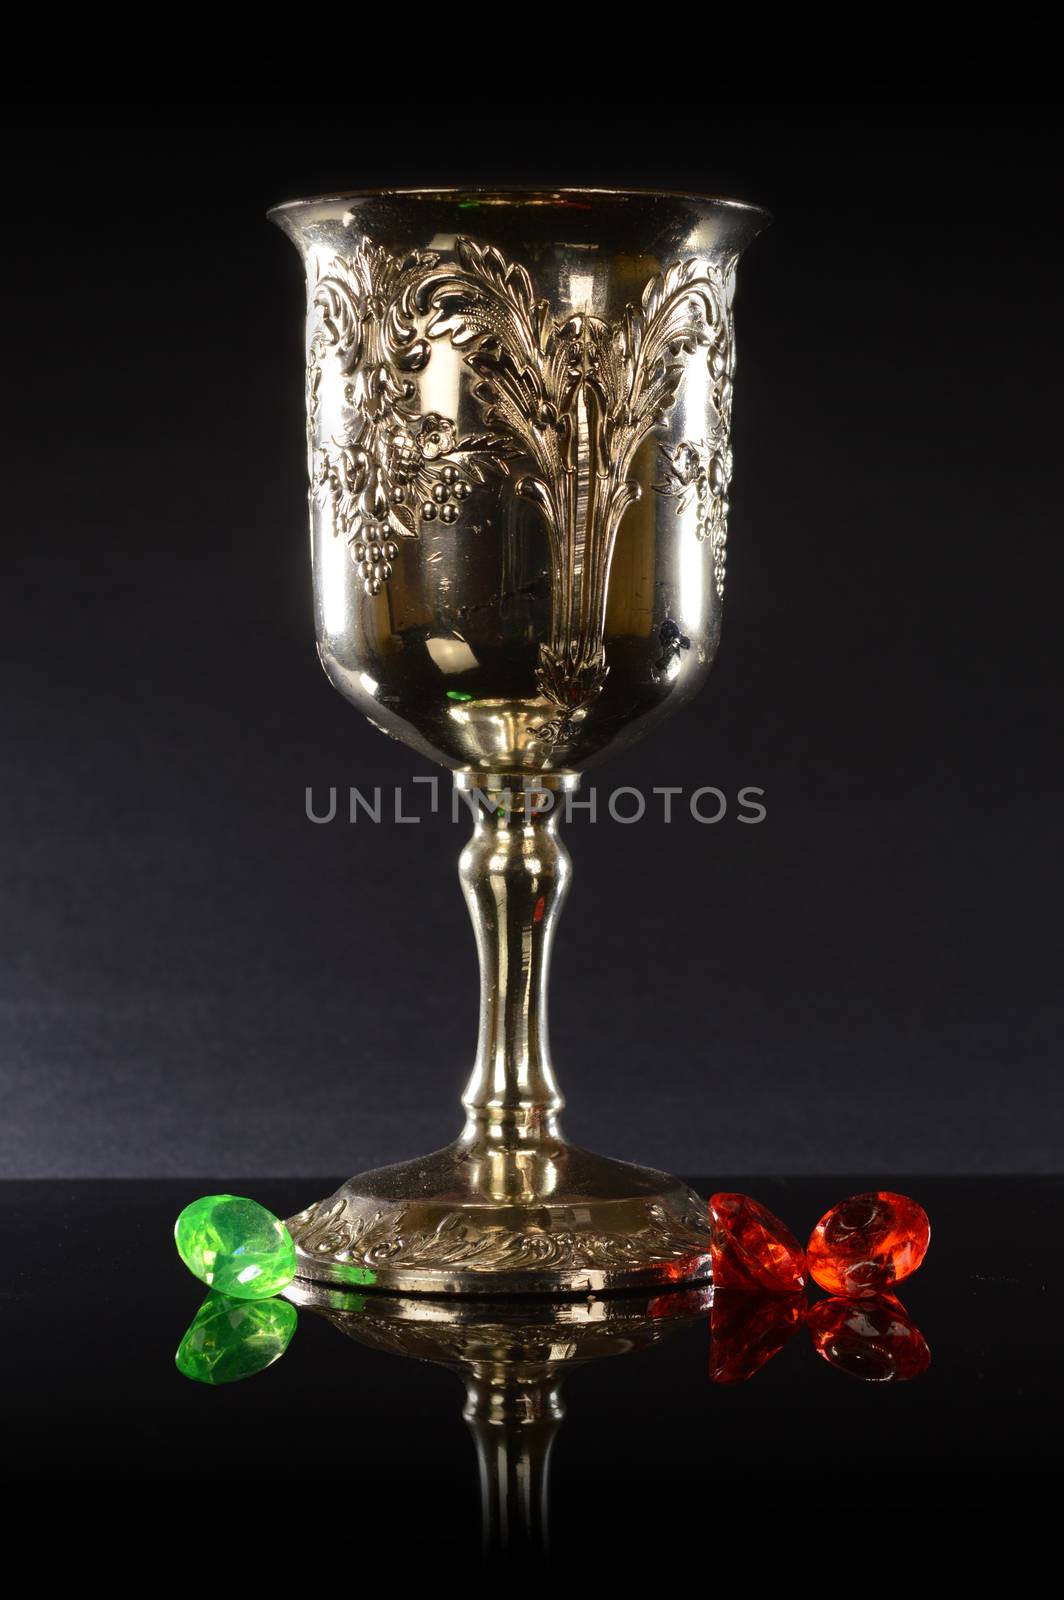 A silver cup with a few gemstones over a black reflective background.